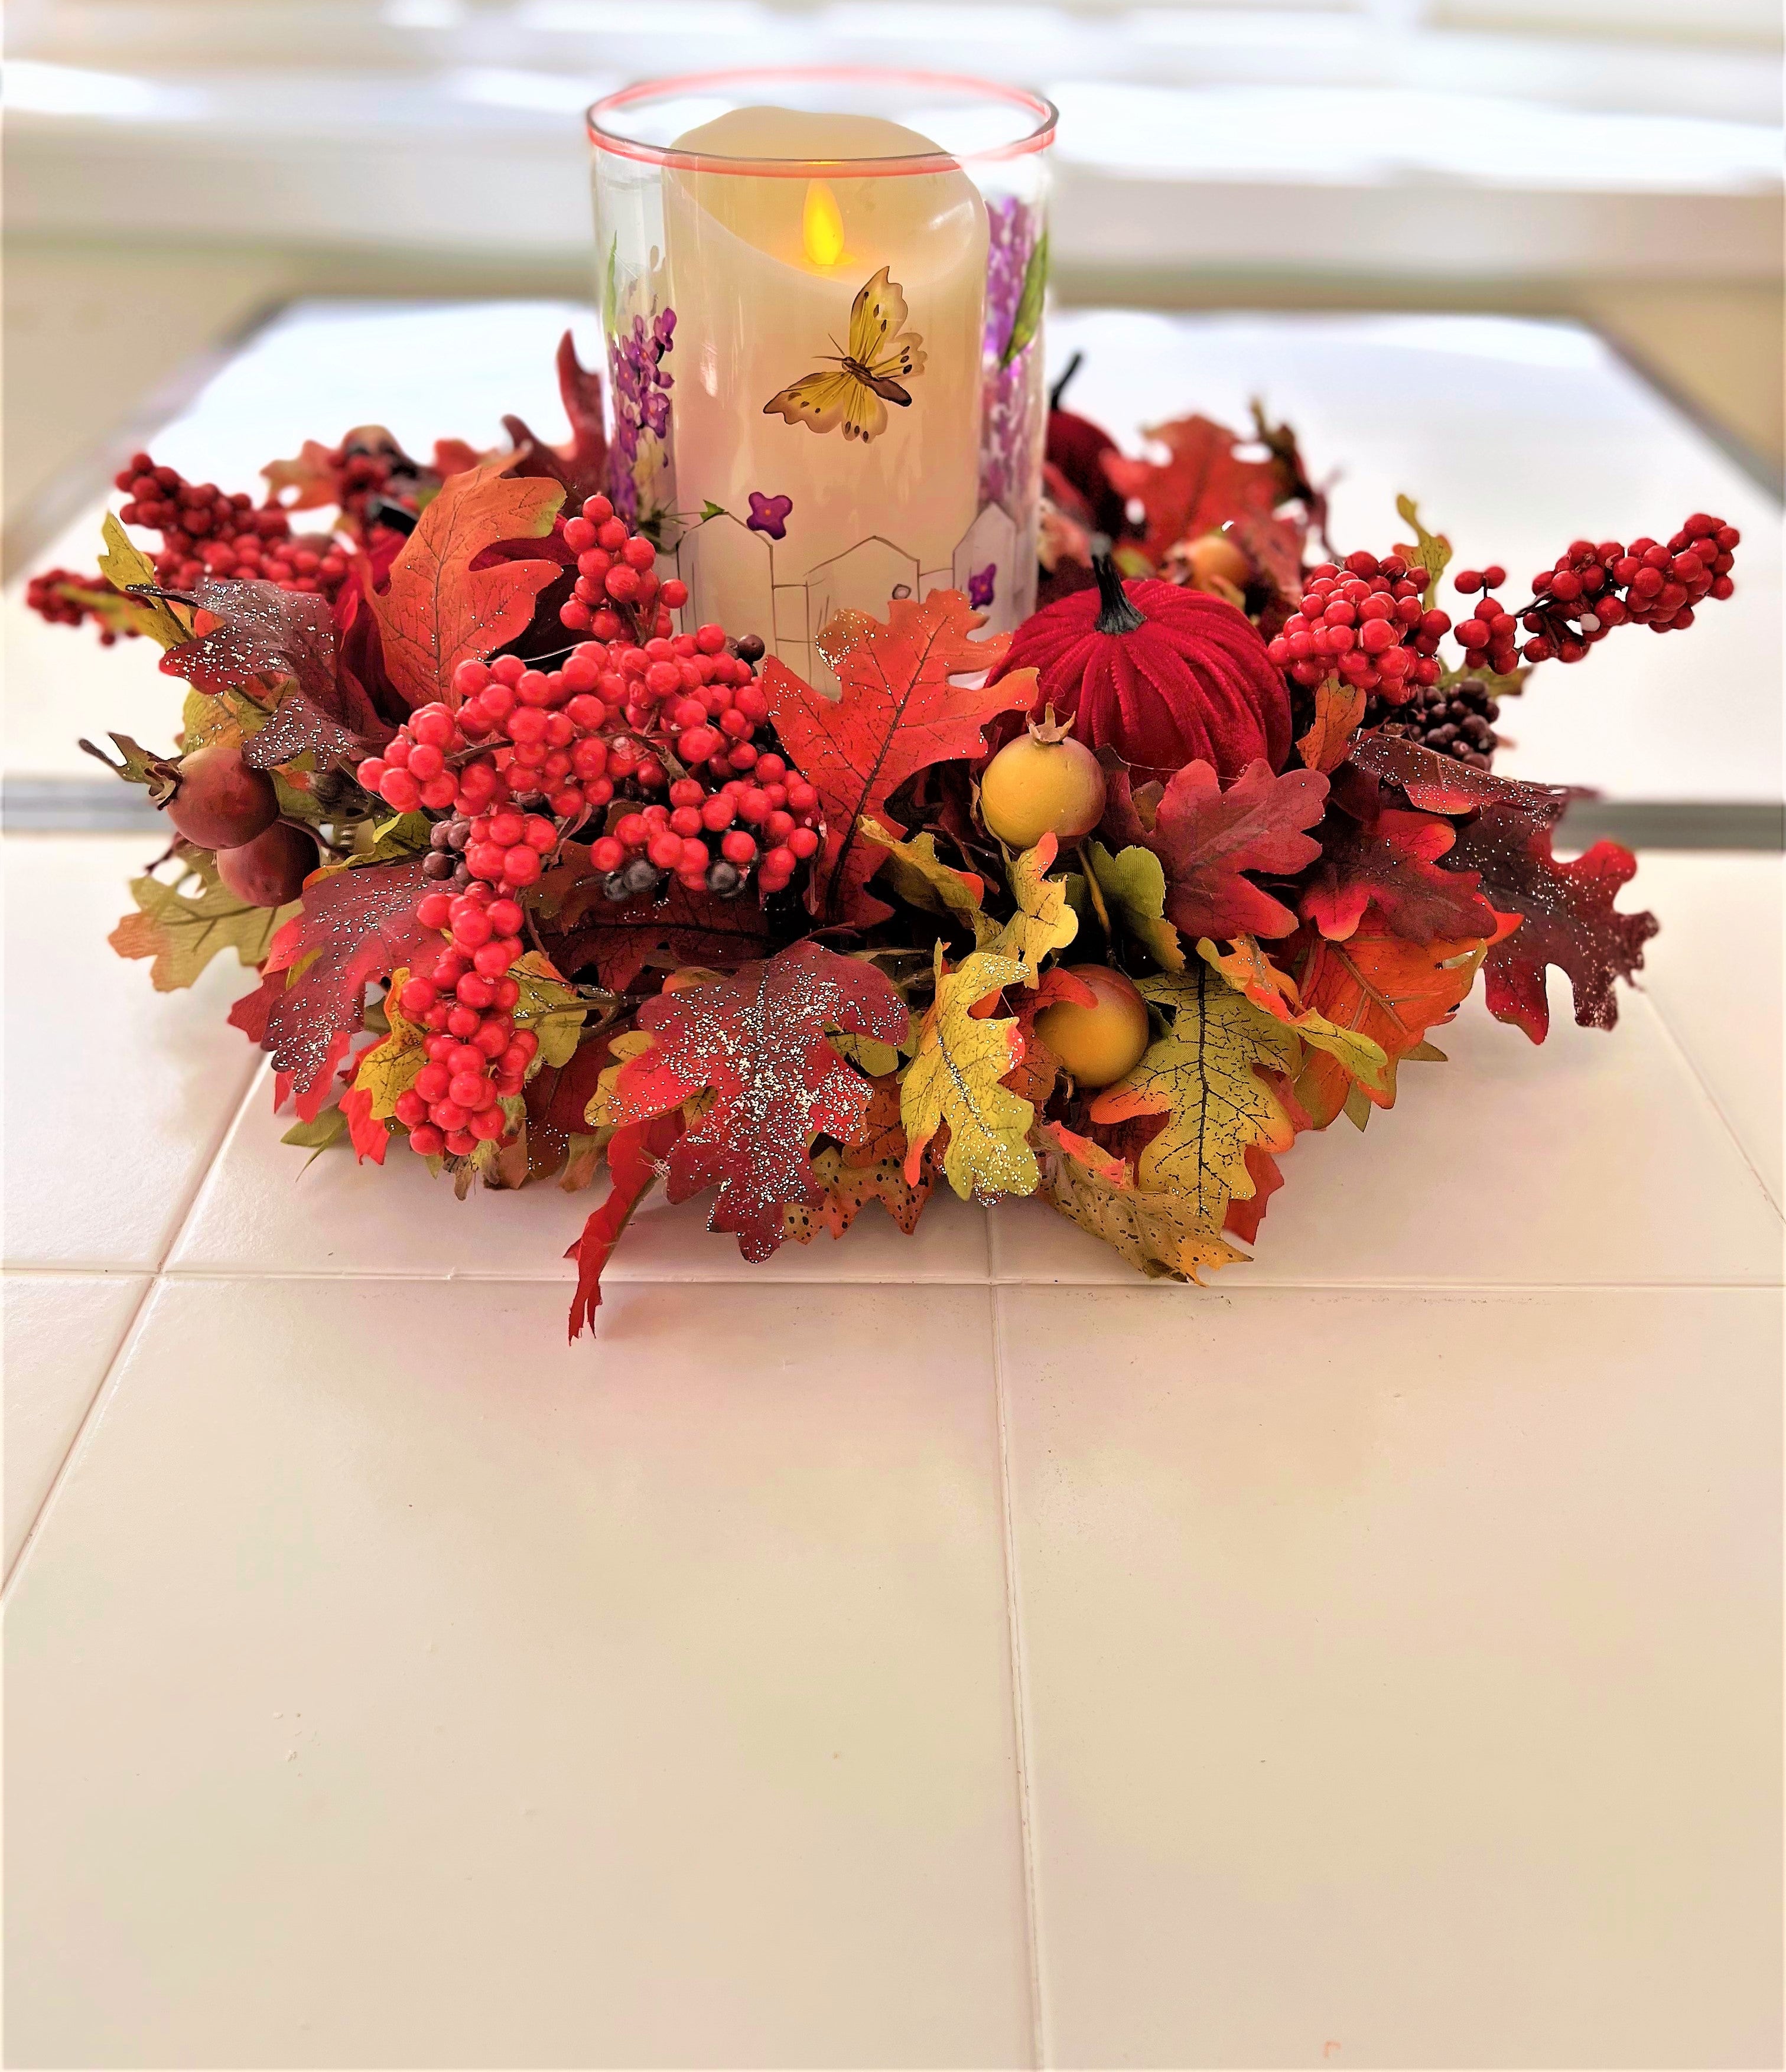 Fall Centerpiece-Berry Extravaganza 19" Diameter X 5" H Stained Glass Hurricane 6" H X 5" W